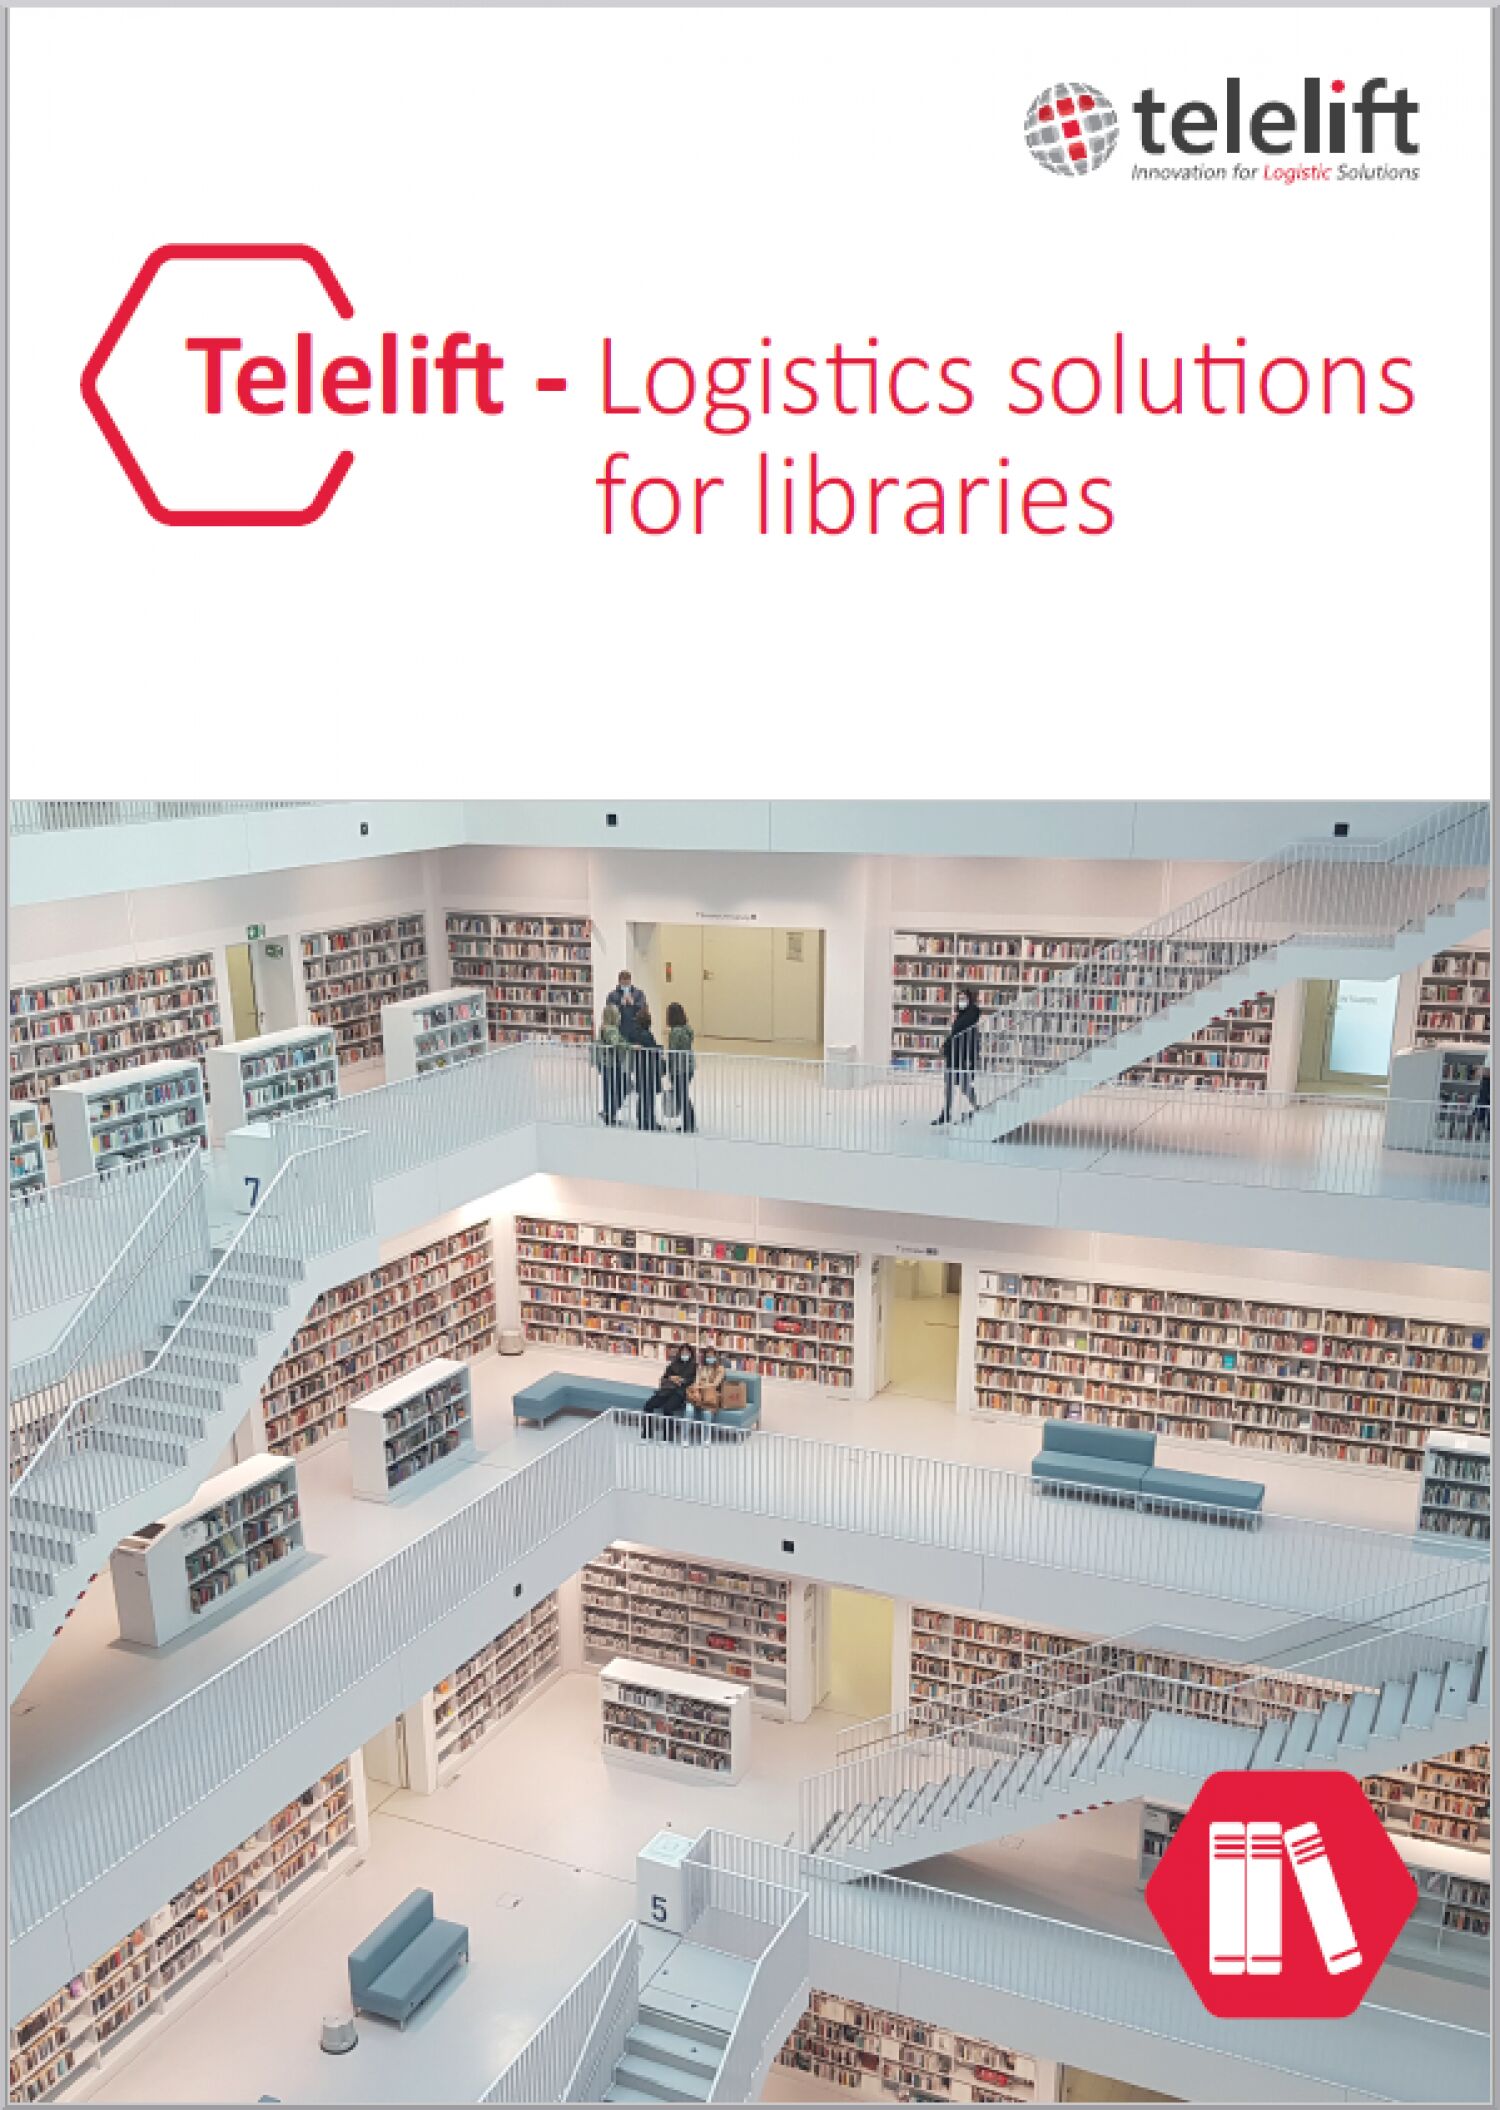 New Telelift Library Brochure